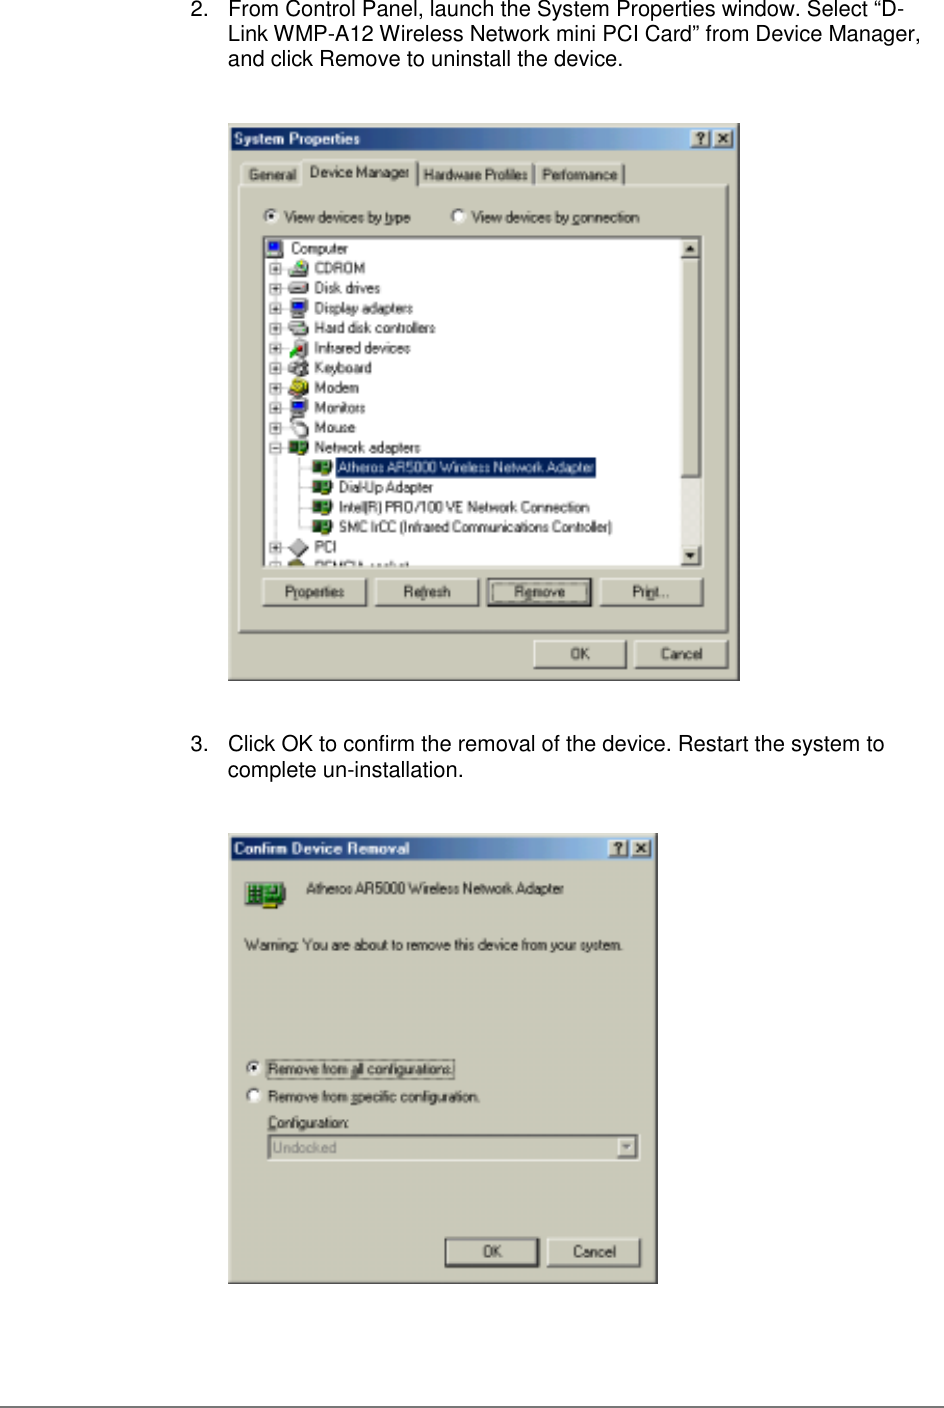 2.  From Control Panel, launch the System Properties window. Select “D-Link WMP-A12 Wireless Network mini PCI Card” from Device Manager,and click Remove to uninstall the device.3.  Click OK to confirm the removal of the device. Restart the system tocomplete un-installation.